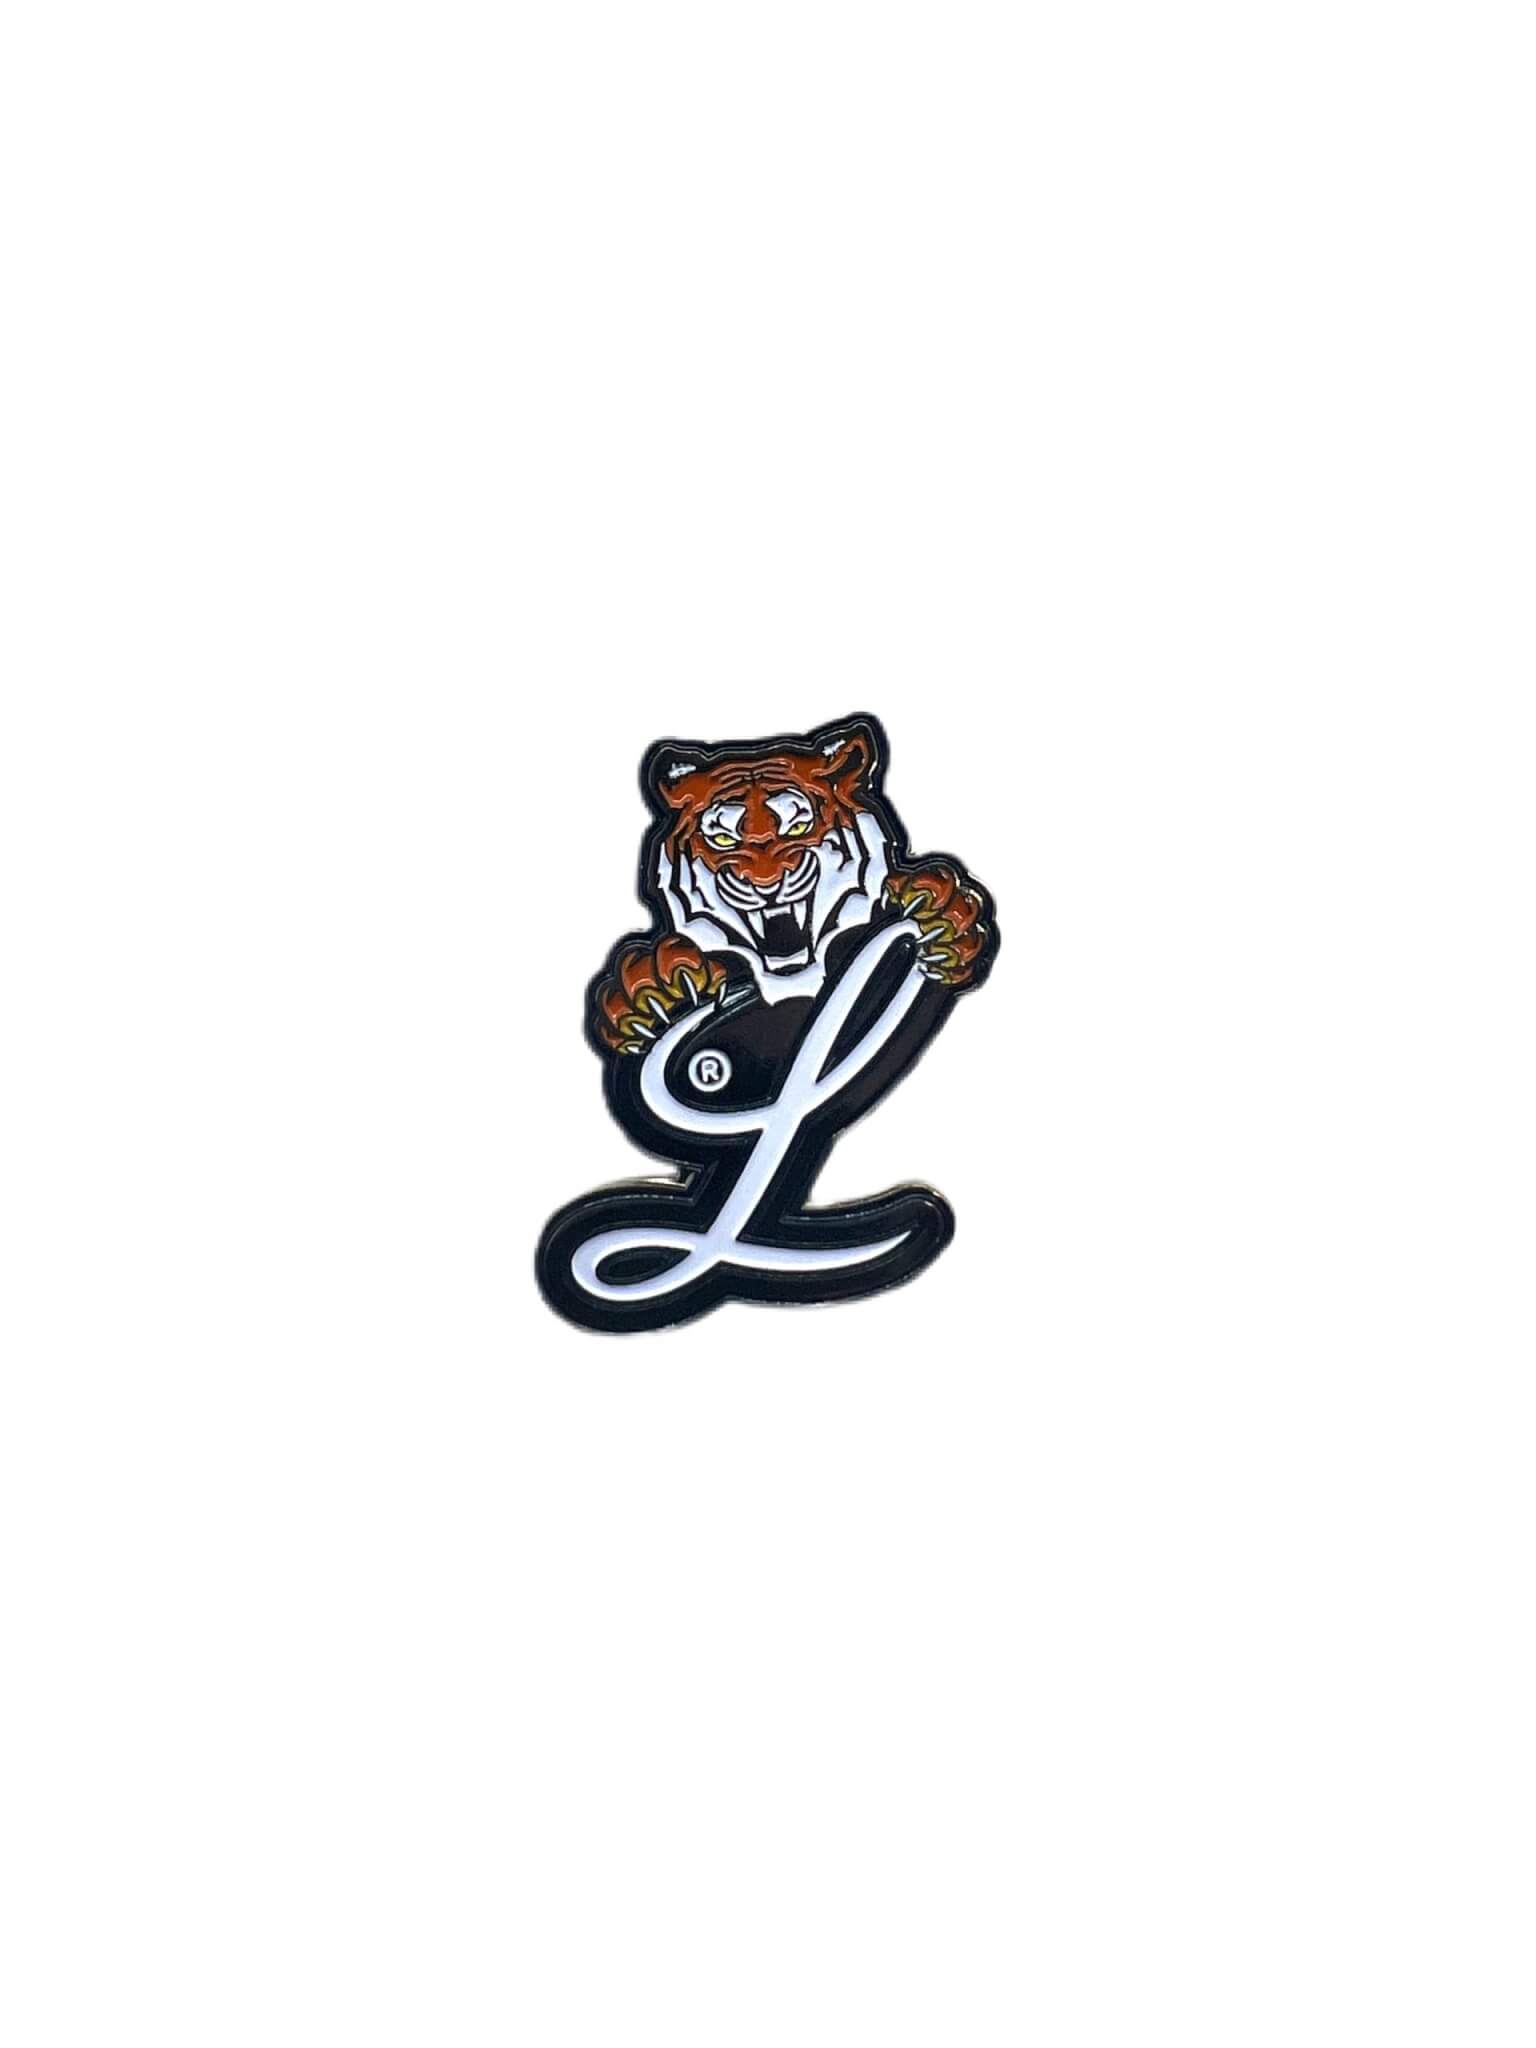 Licey 